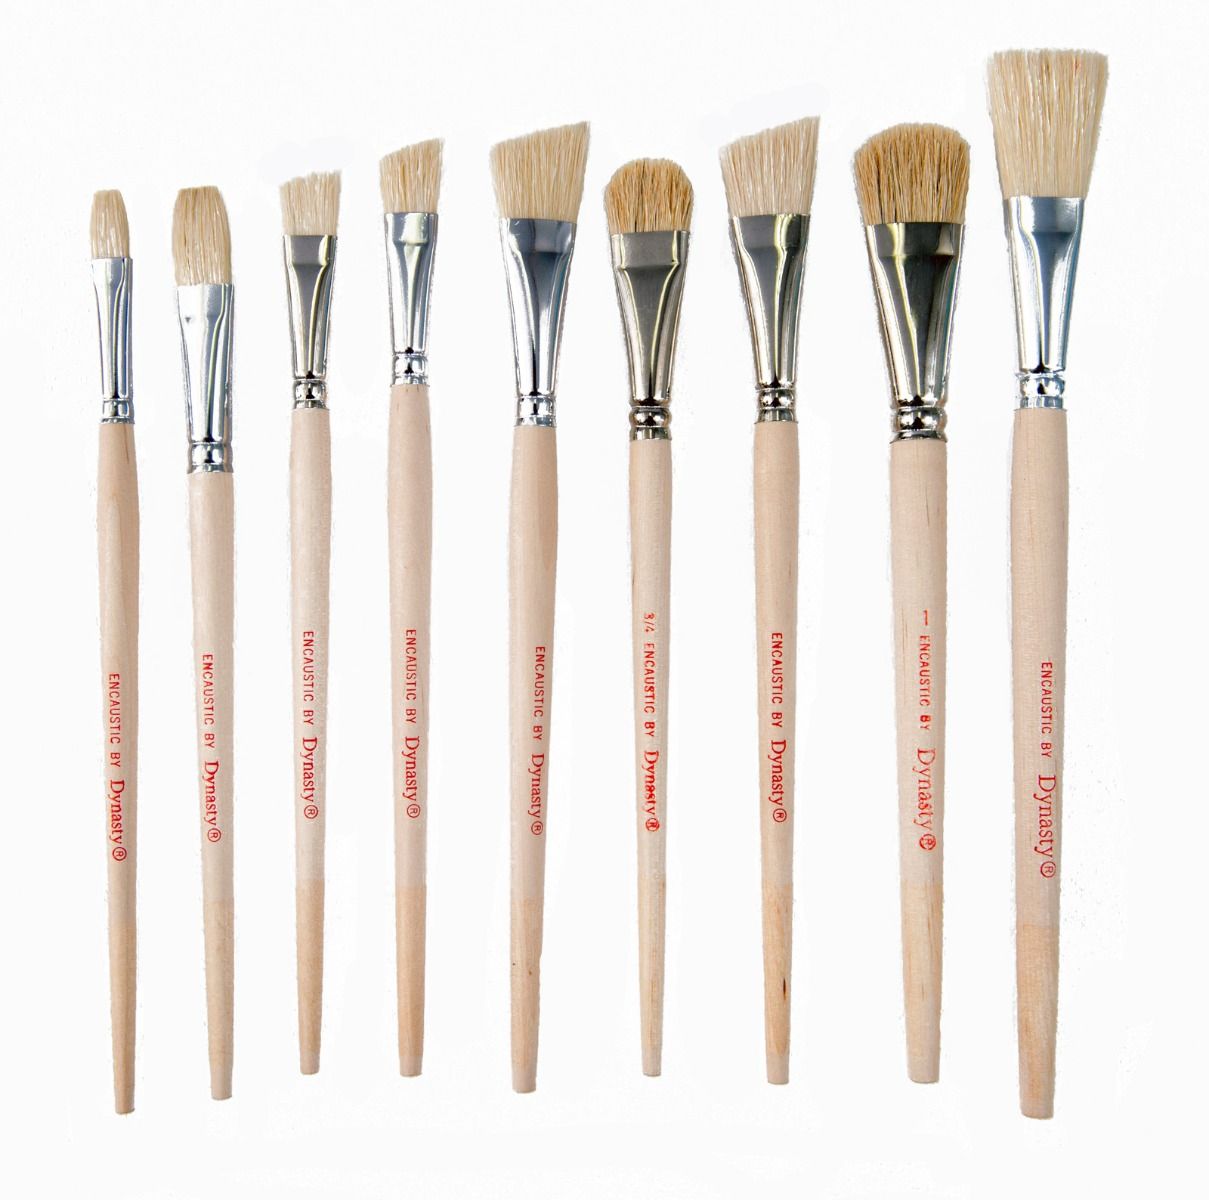 Encaustic-Hot Wax Brushes Open Stock